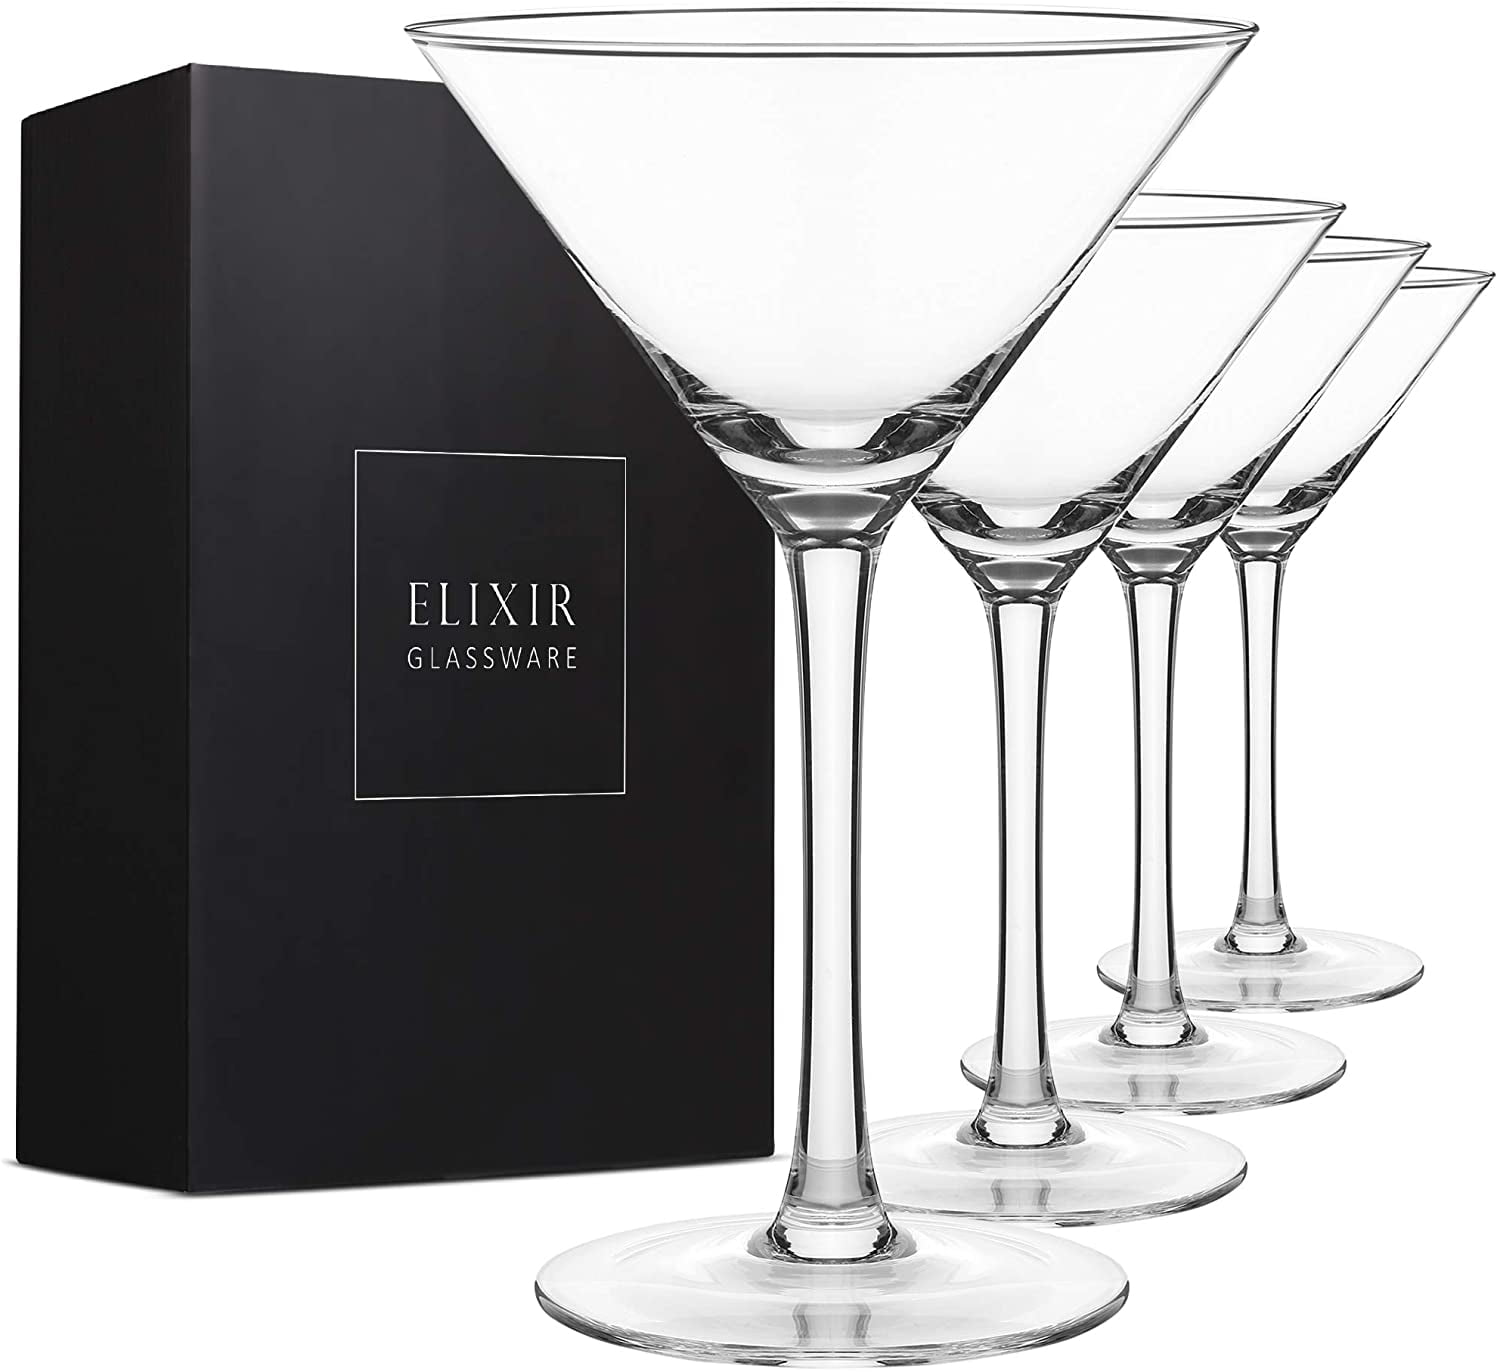 YAWALL 8.5 Oz Stemless Cocktail Glasses for Martini Martini Glasses Set of 4 Lead-free Crystal Heavy Base Dessert Glassware Home Bar Use Housewarming Party Gifts Margarita & More 